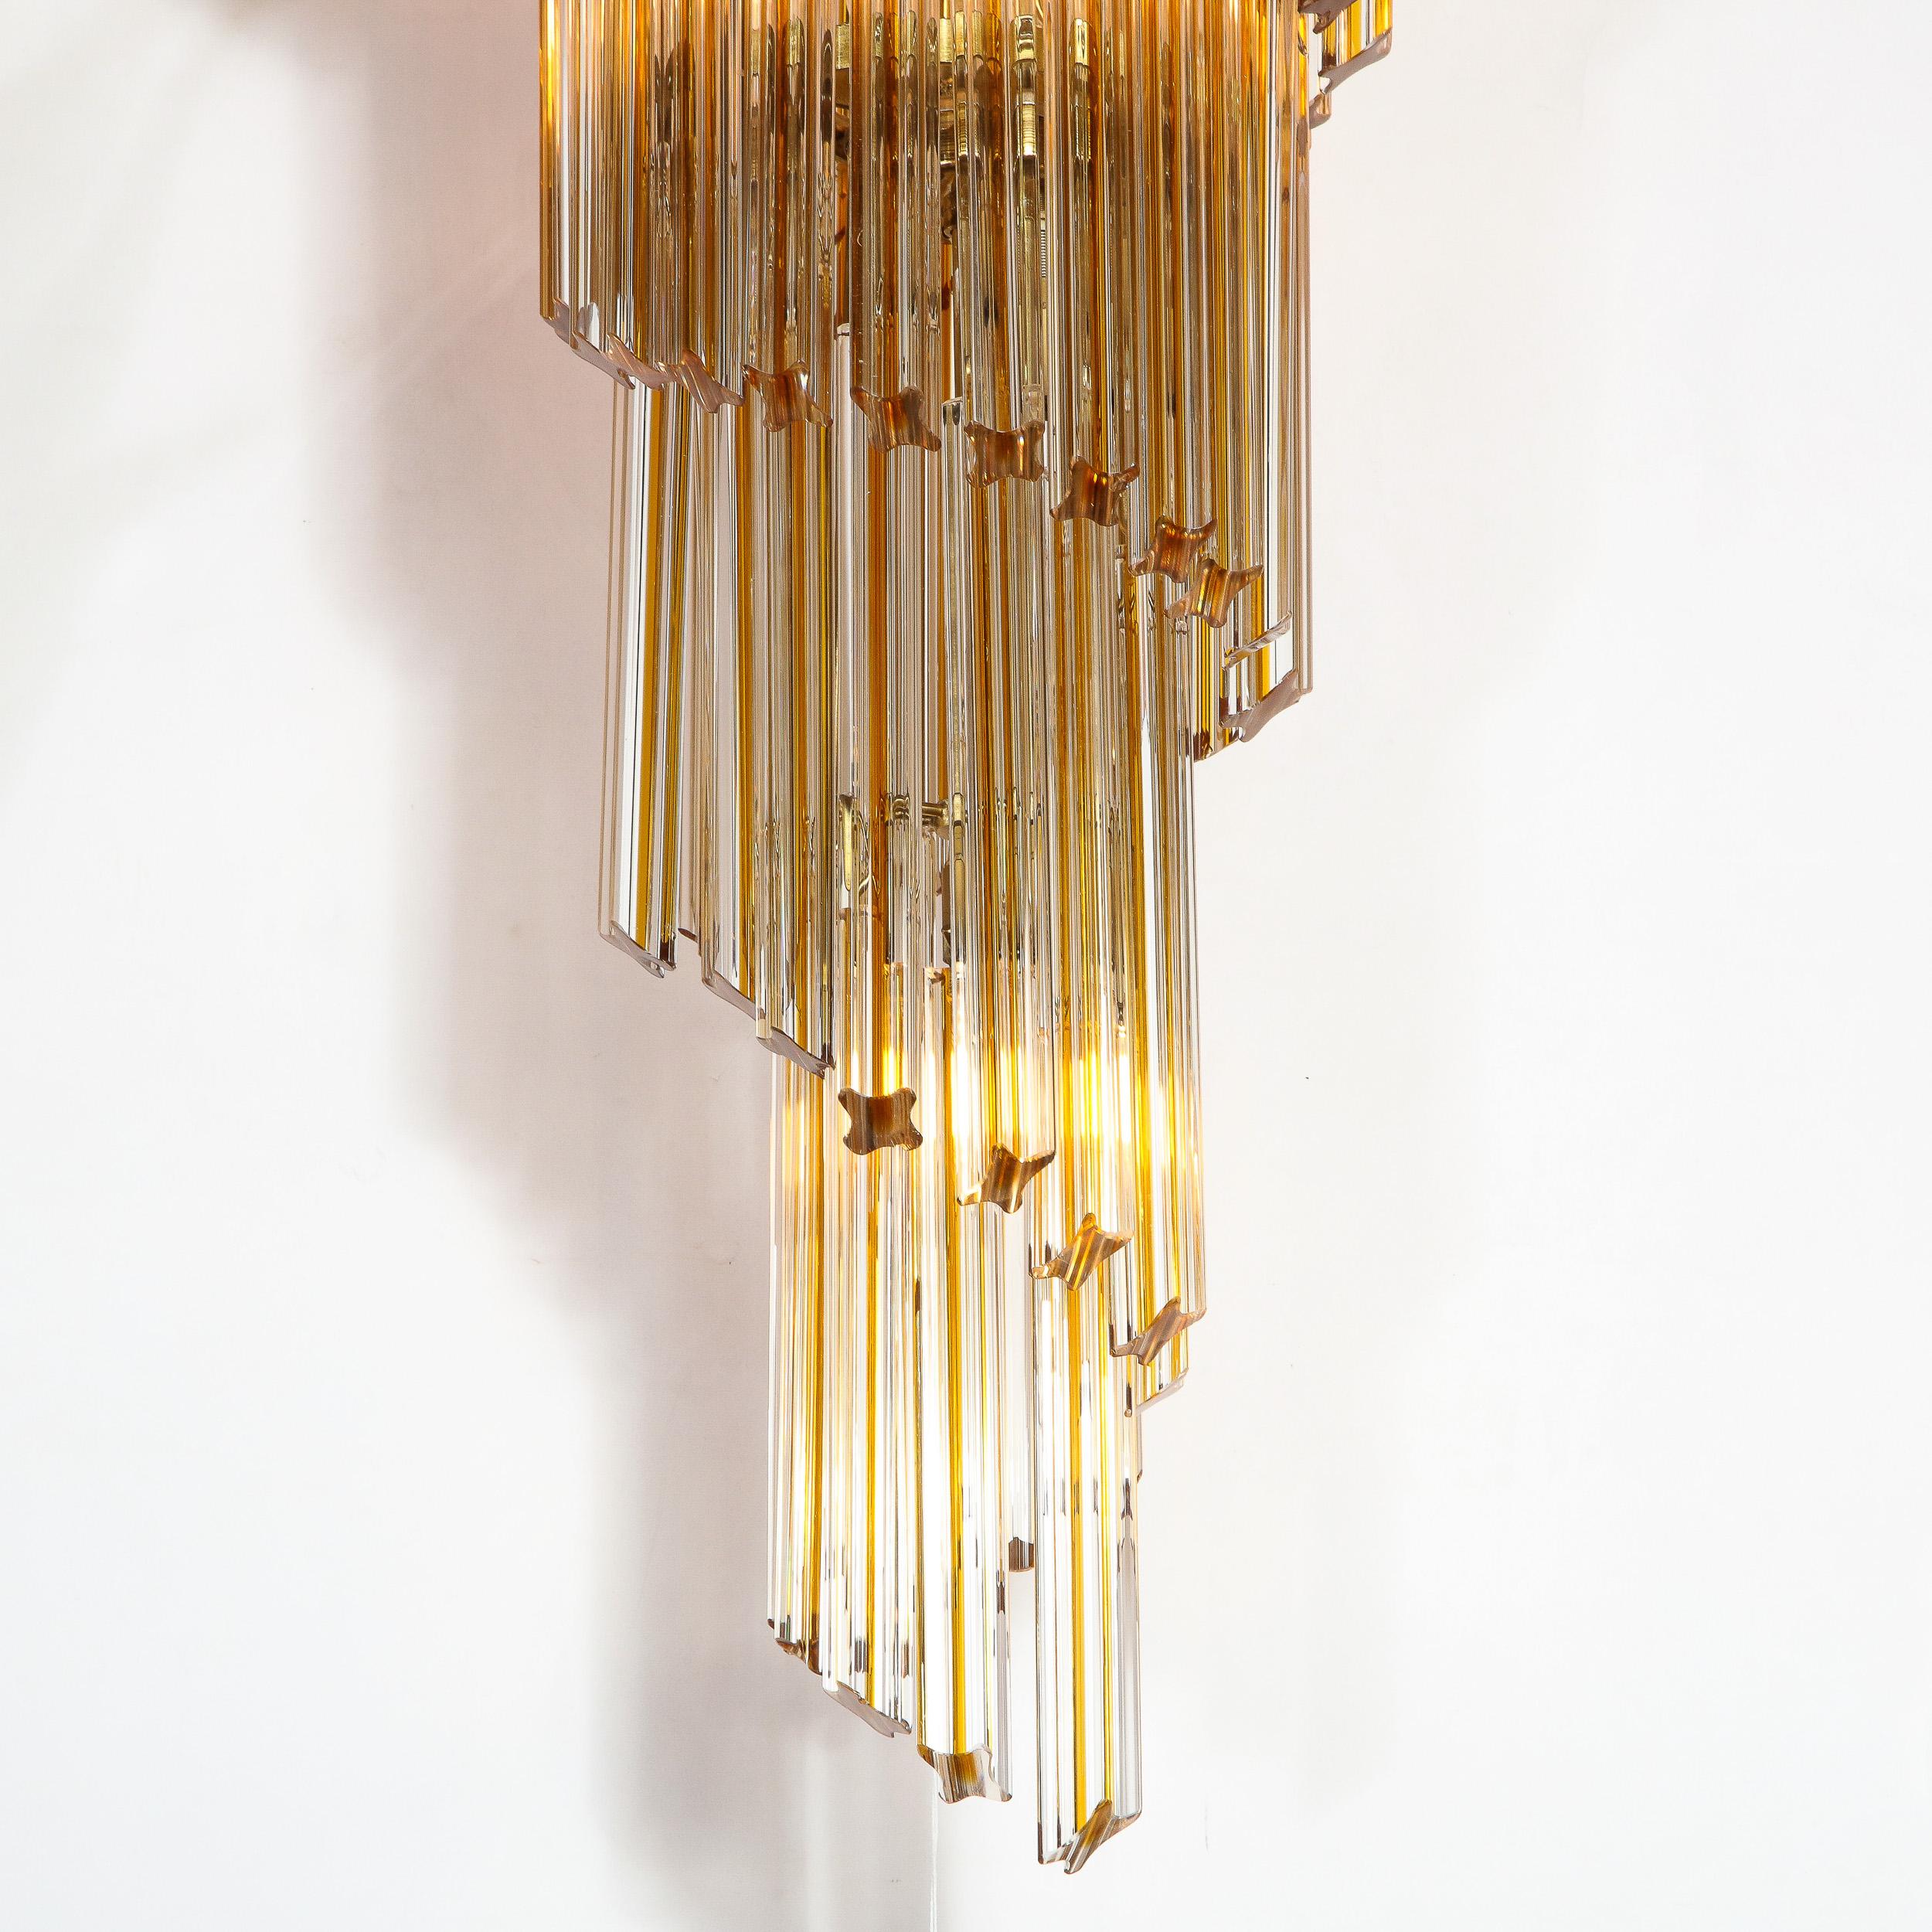 This stunning Mid-Century Modern camer chandelier was realized in Italy circa 1970. It features a spiral helix form composed of five tiers of amber hued quadretti crystals that taper downwards with brass fittings throughout. The piece is imbued with